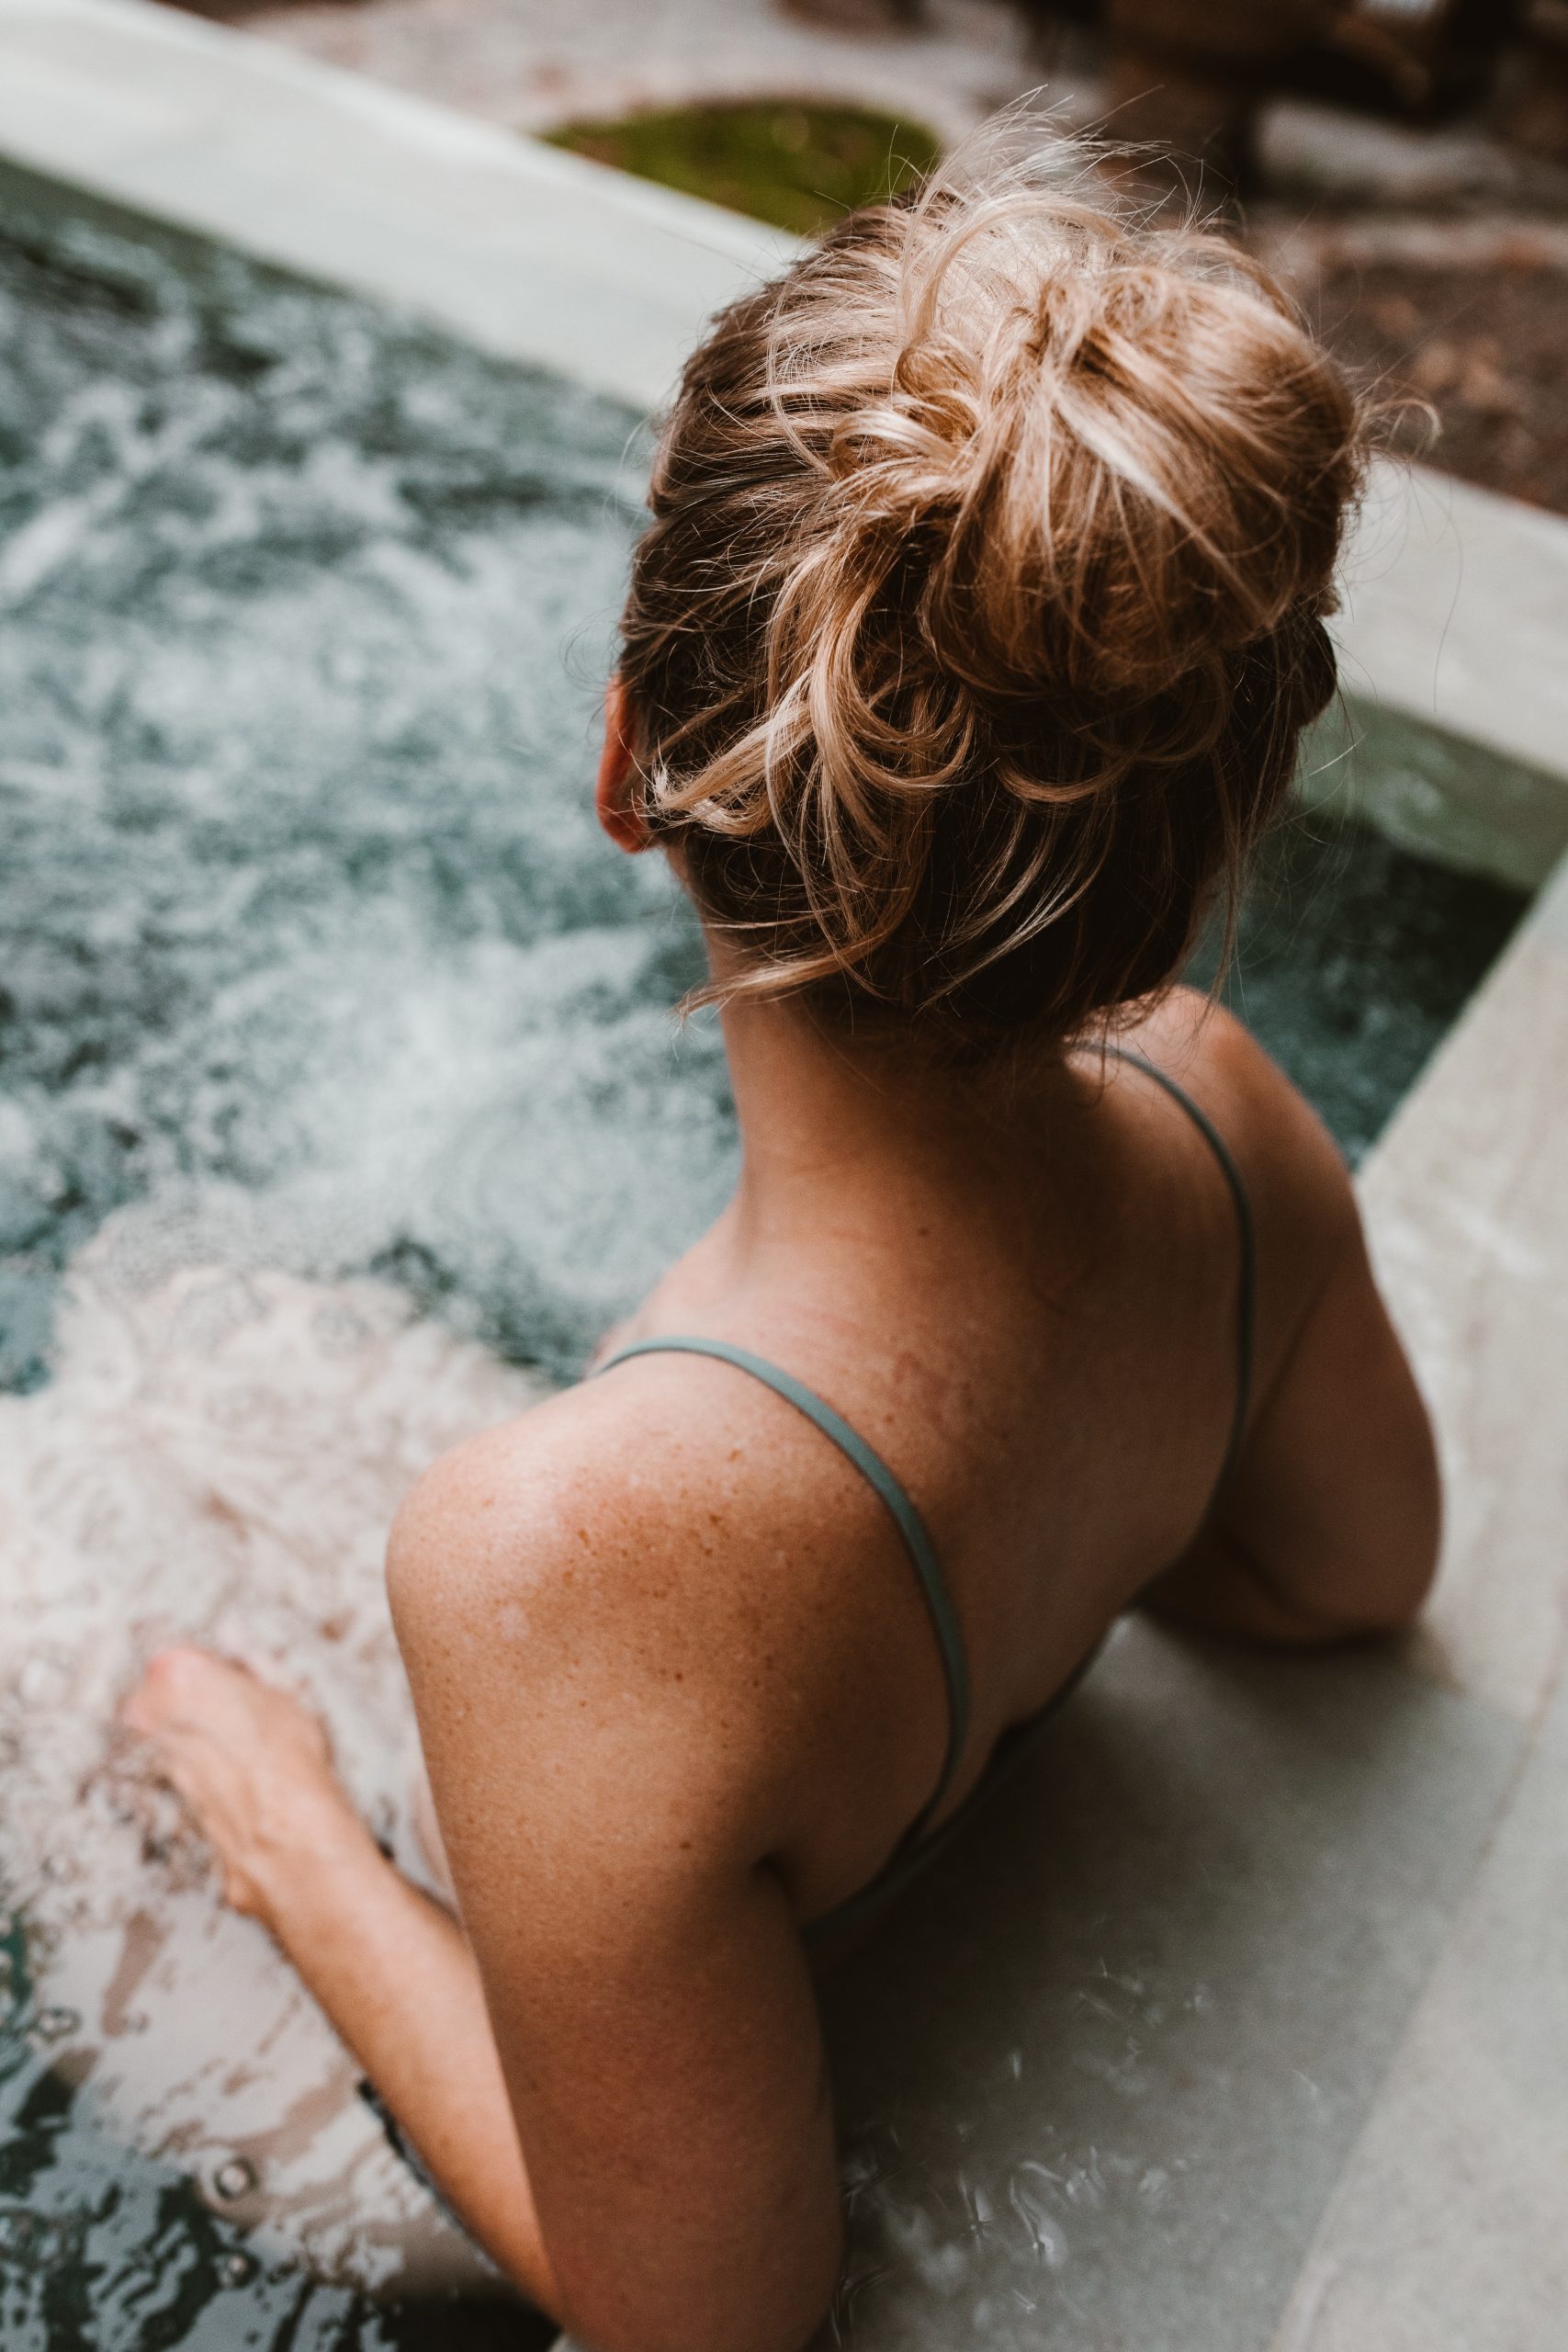 CF's Guide To Cancer-Safe Spa Treatments